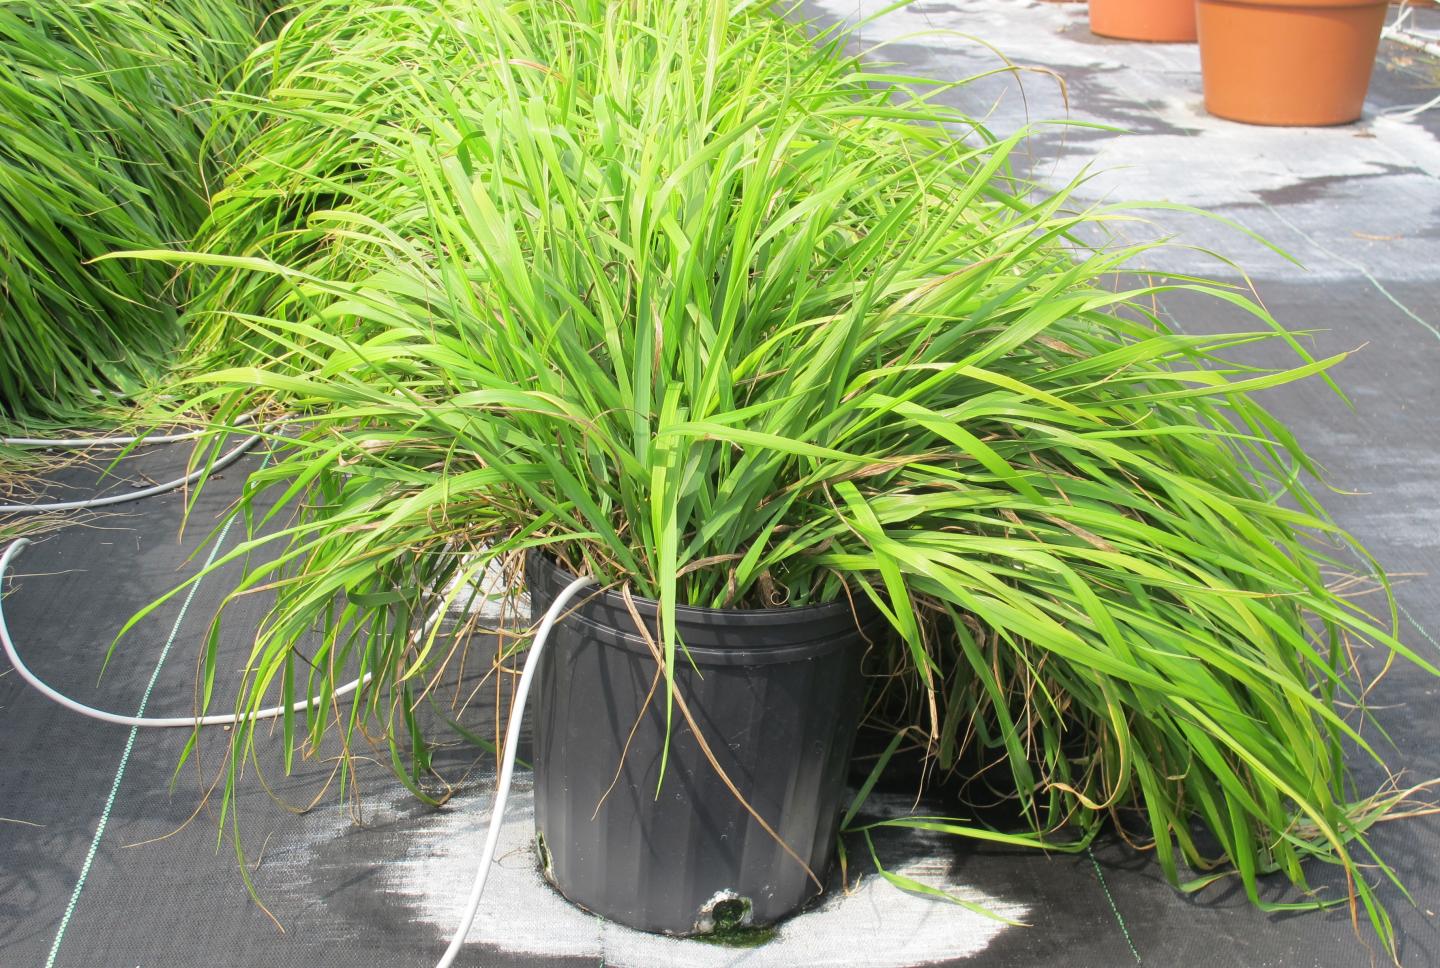 Mosquito-Repelling Chemicals Identified in Traditional Sweetgrass